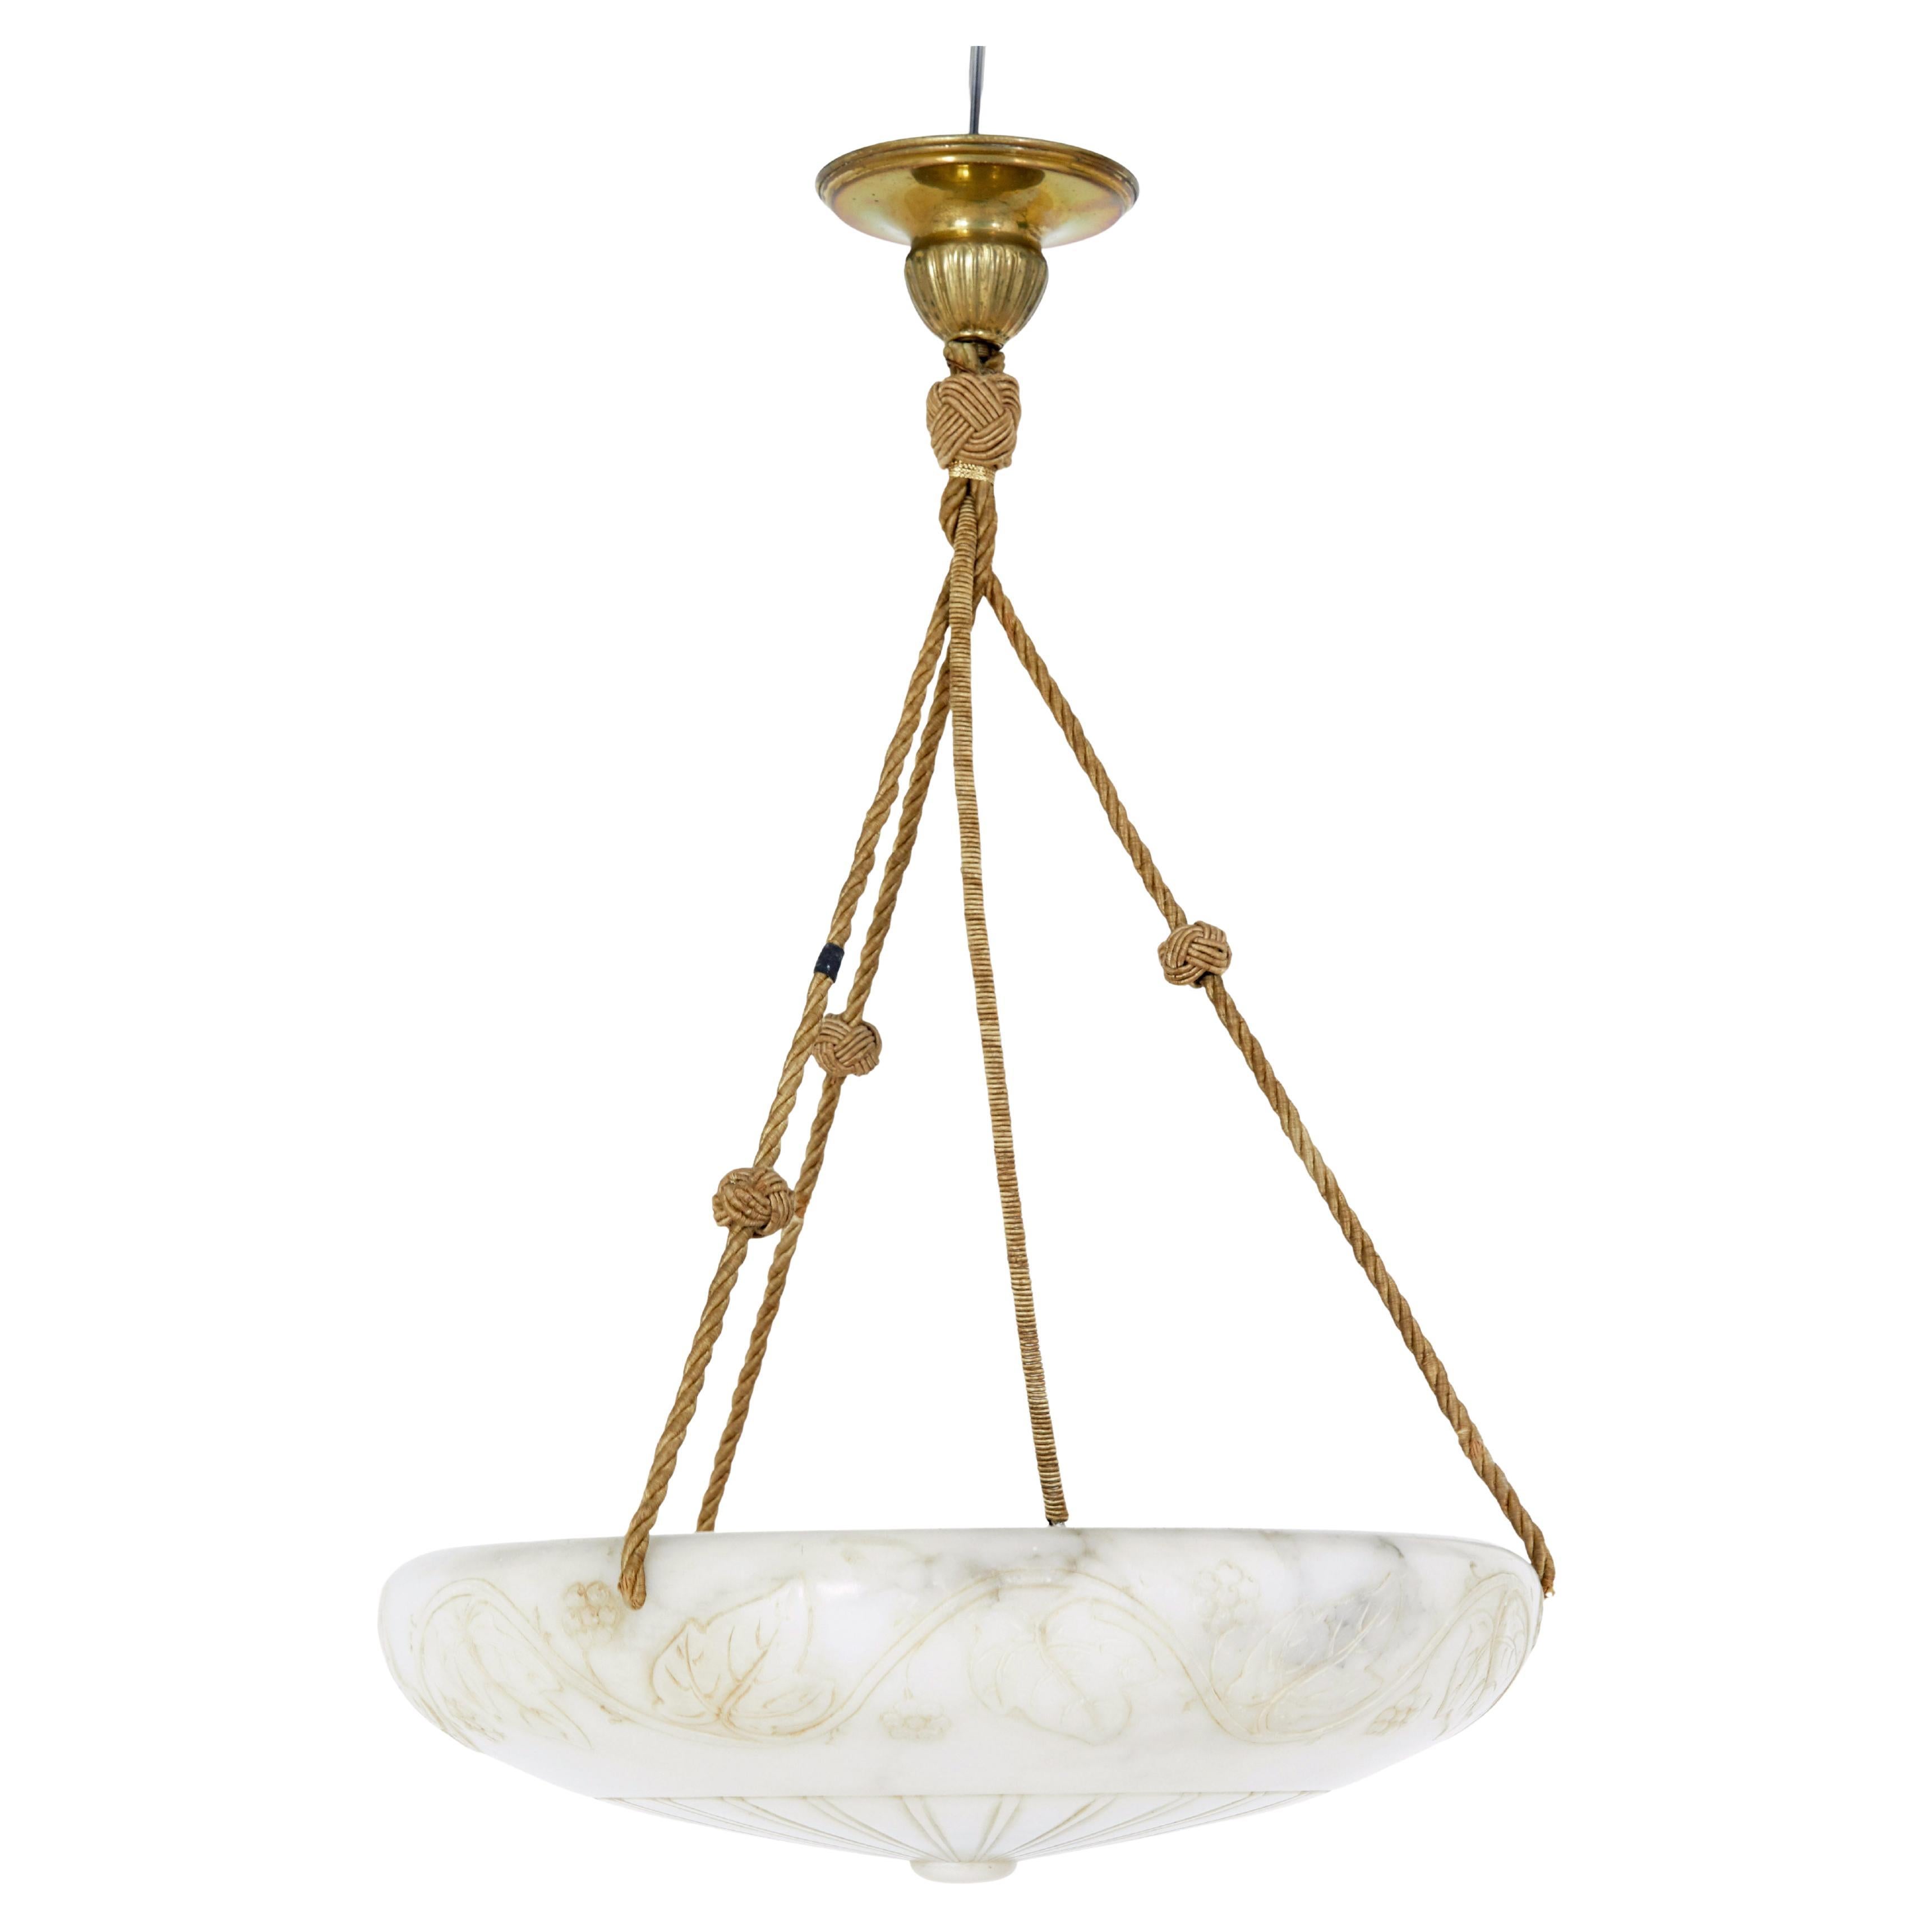 Art deco alabaster and brass pendant light For Sale